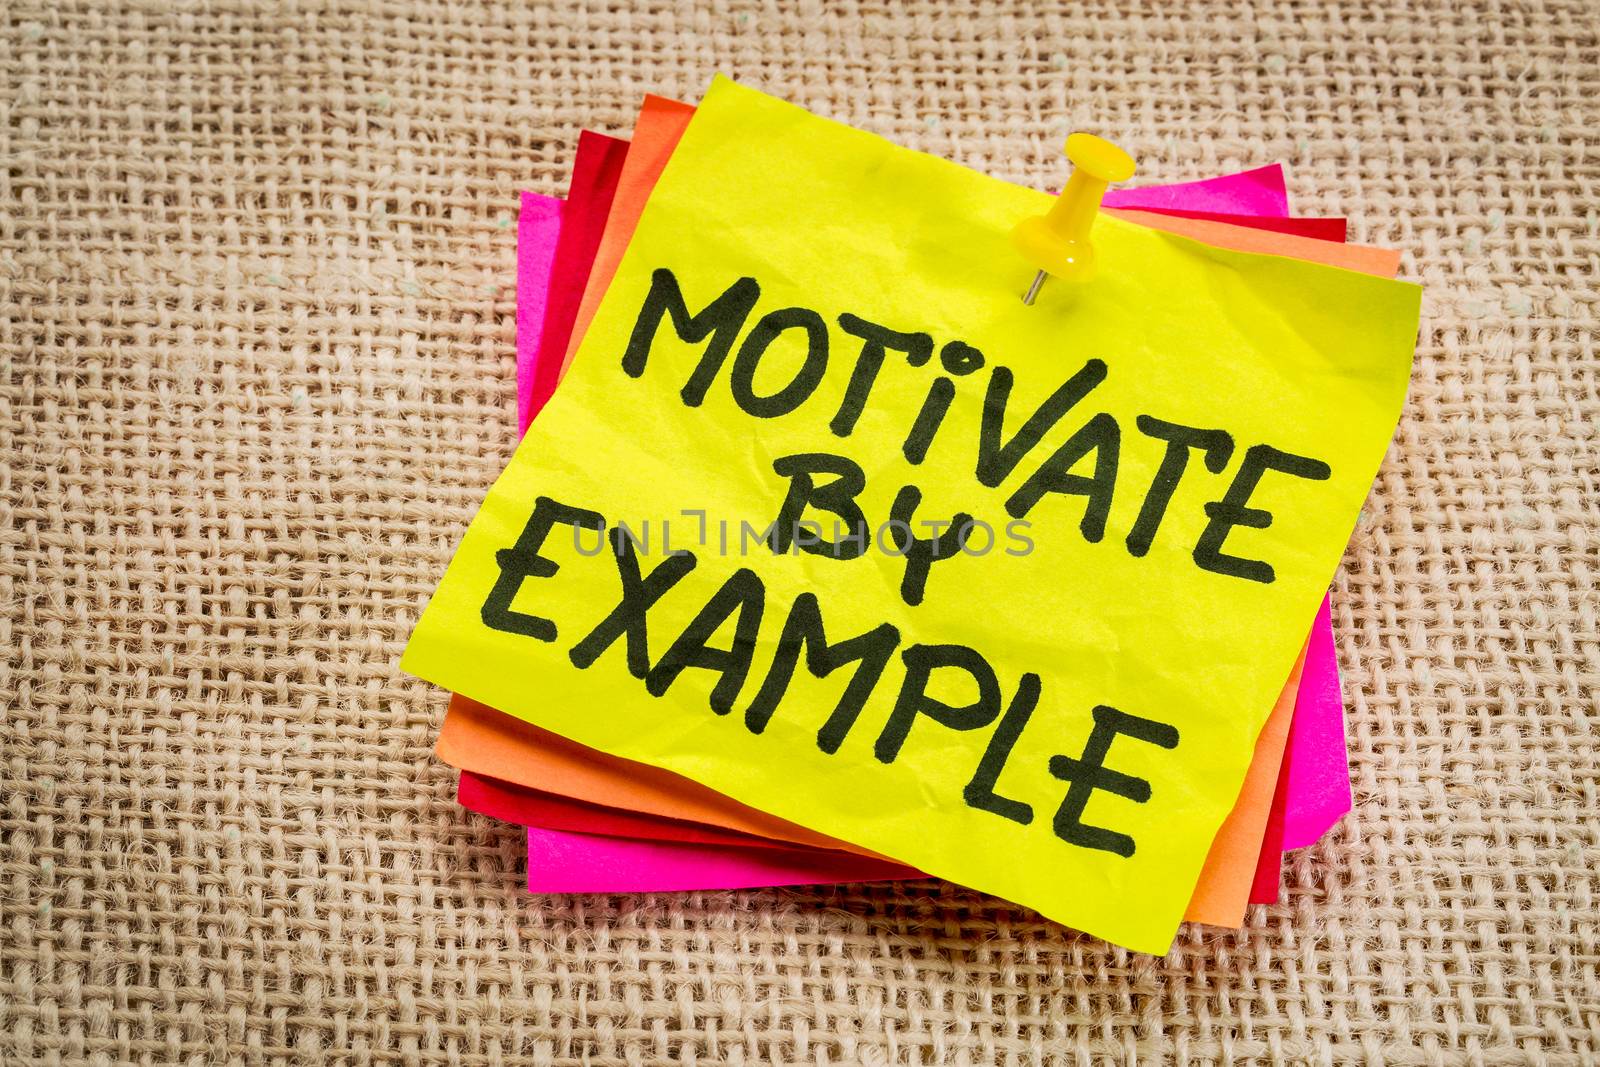 motivate by example - advice or reminder on a yellow sticky note